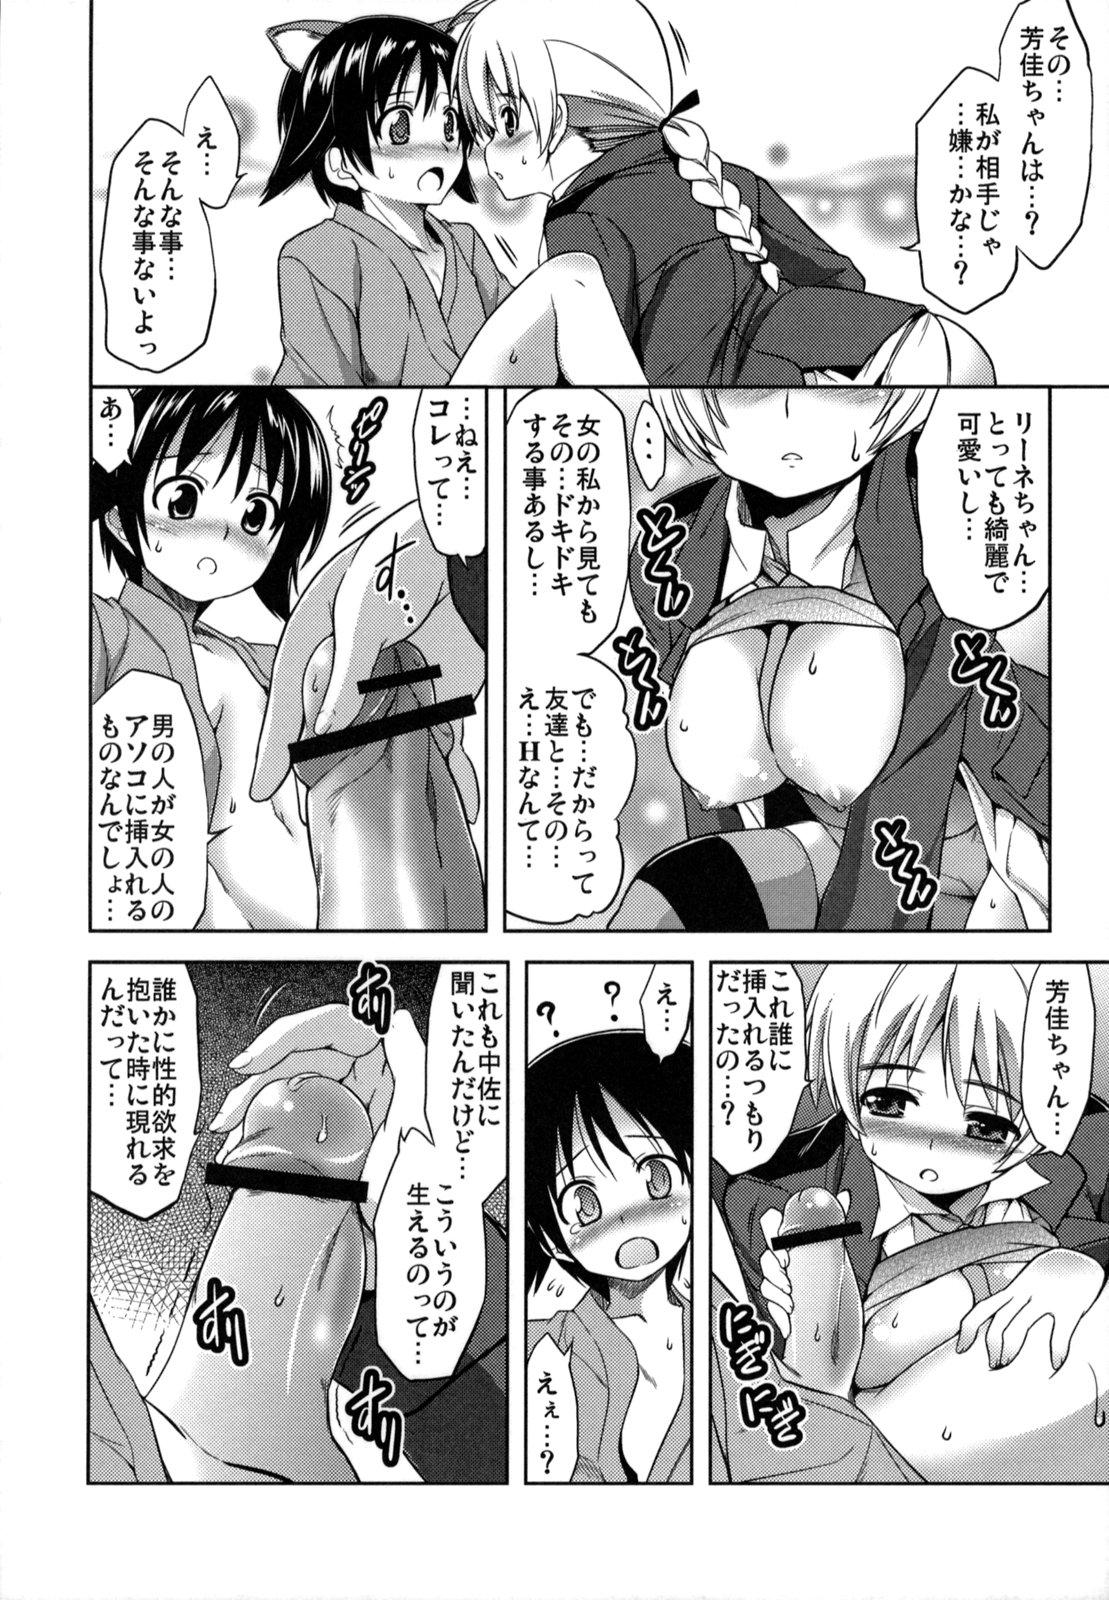 Sex Pussy GL WITCHES - Strike witches Big Black Dick - Page 5